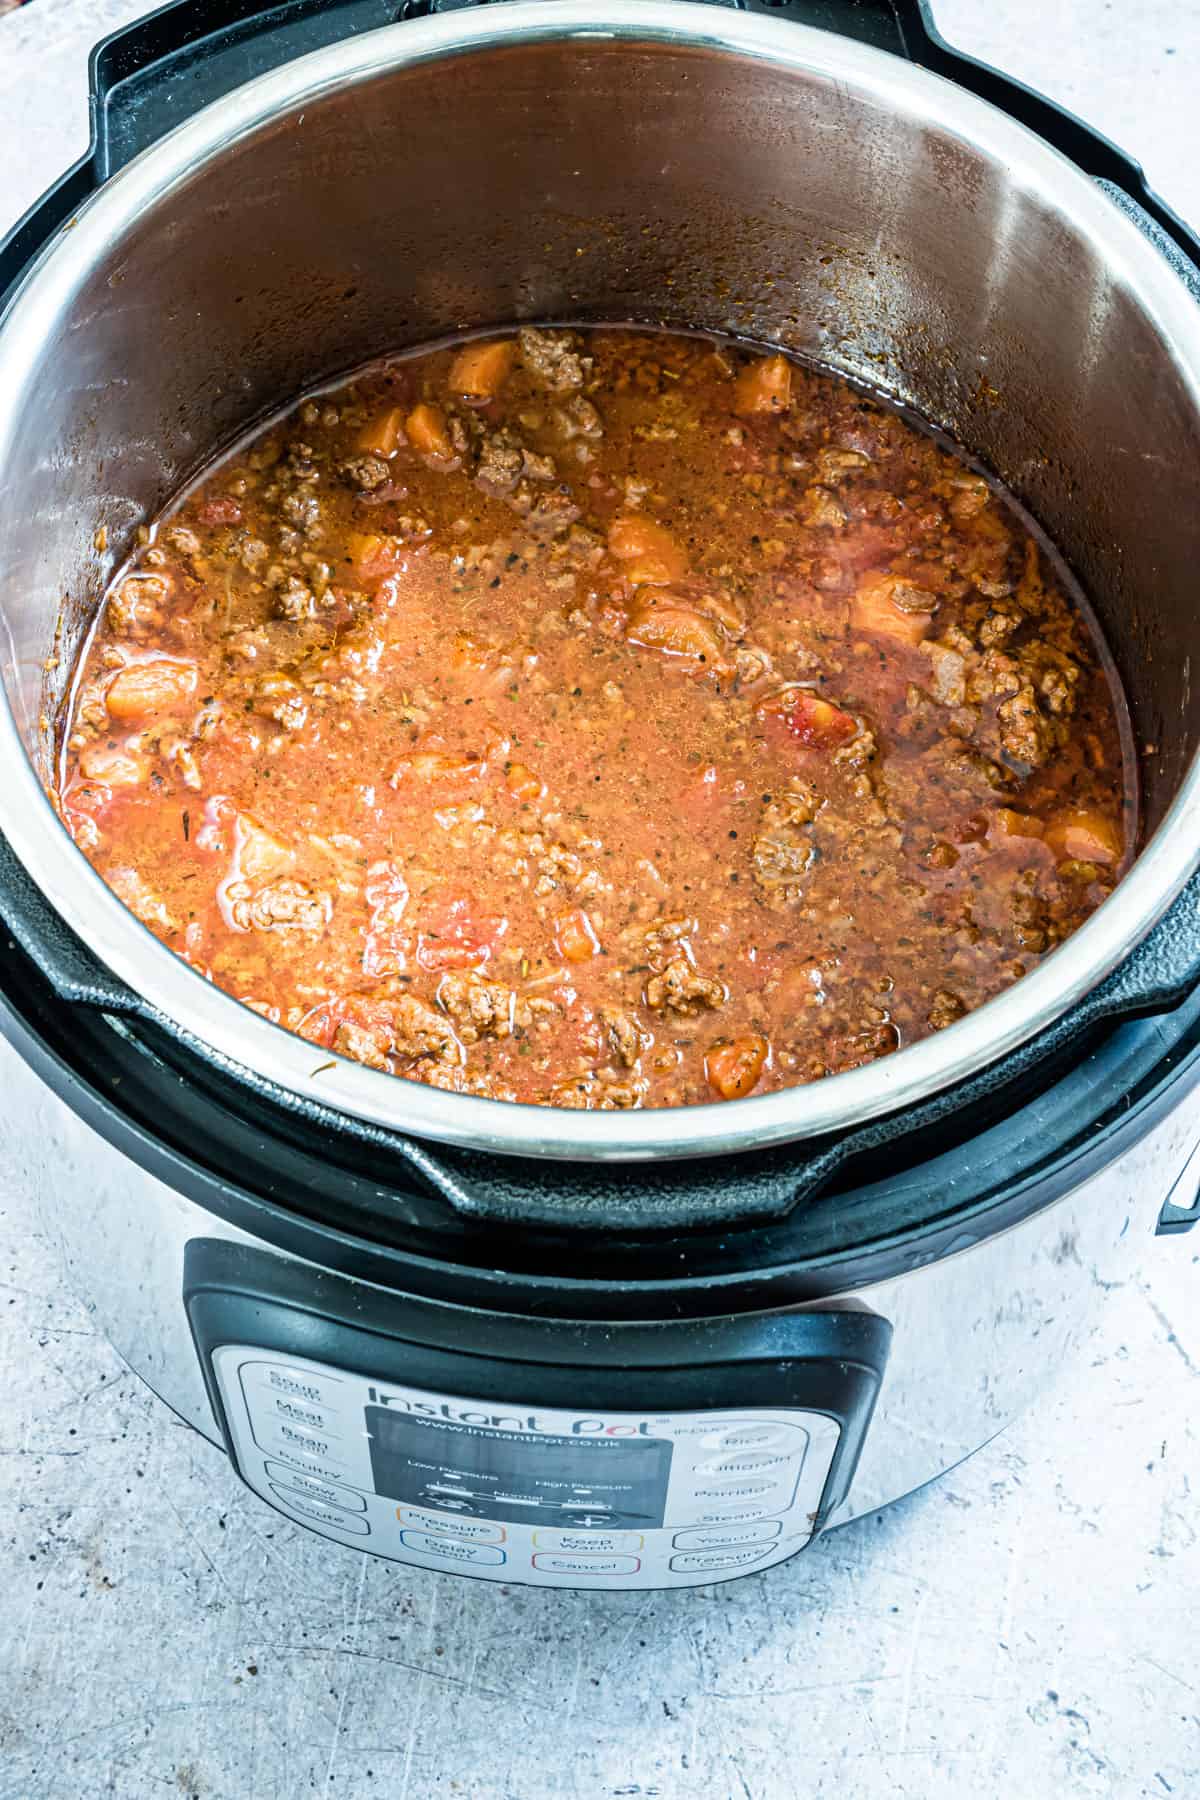 top down view of the completed bolognese sauce inside theinstant pot